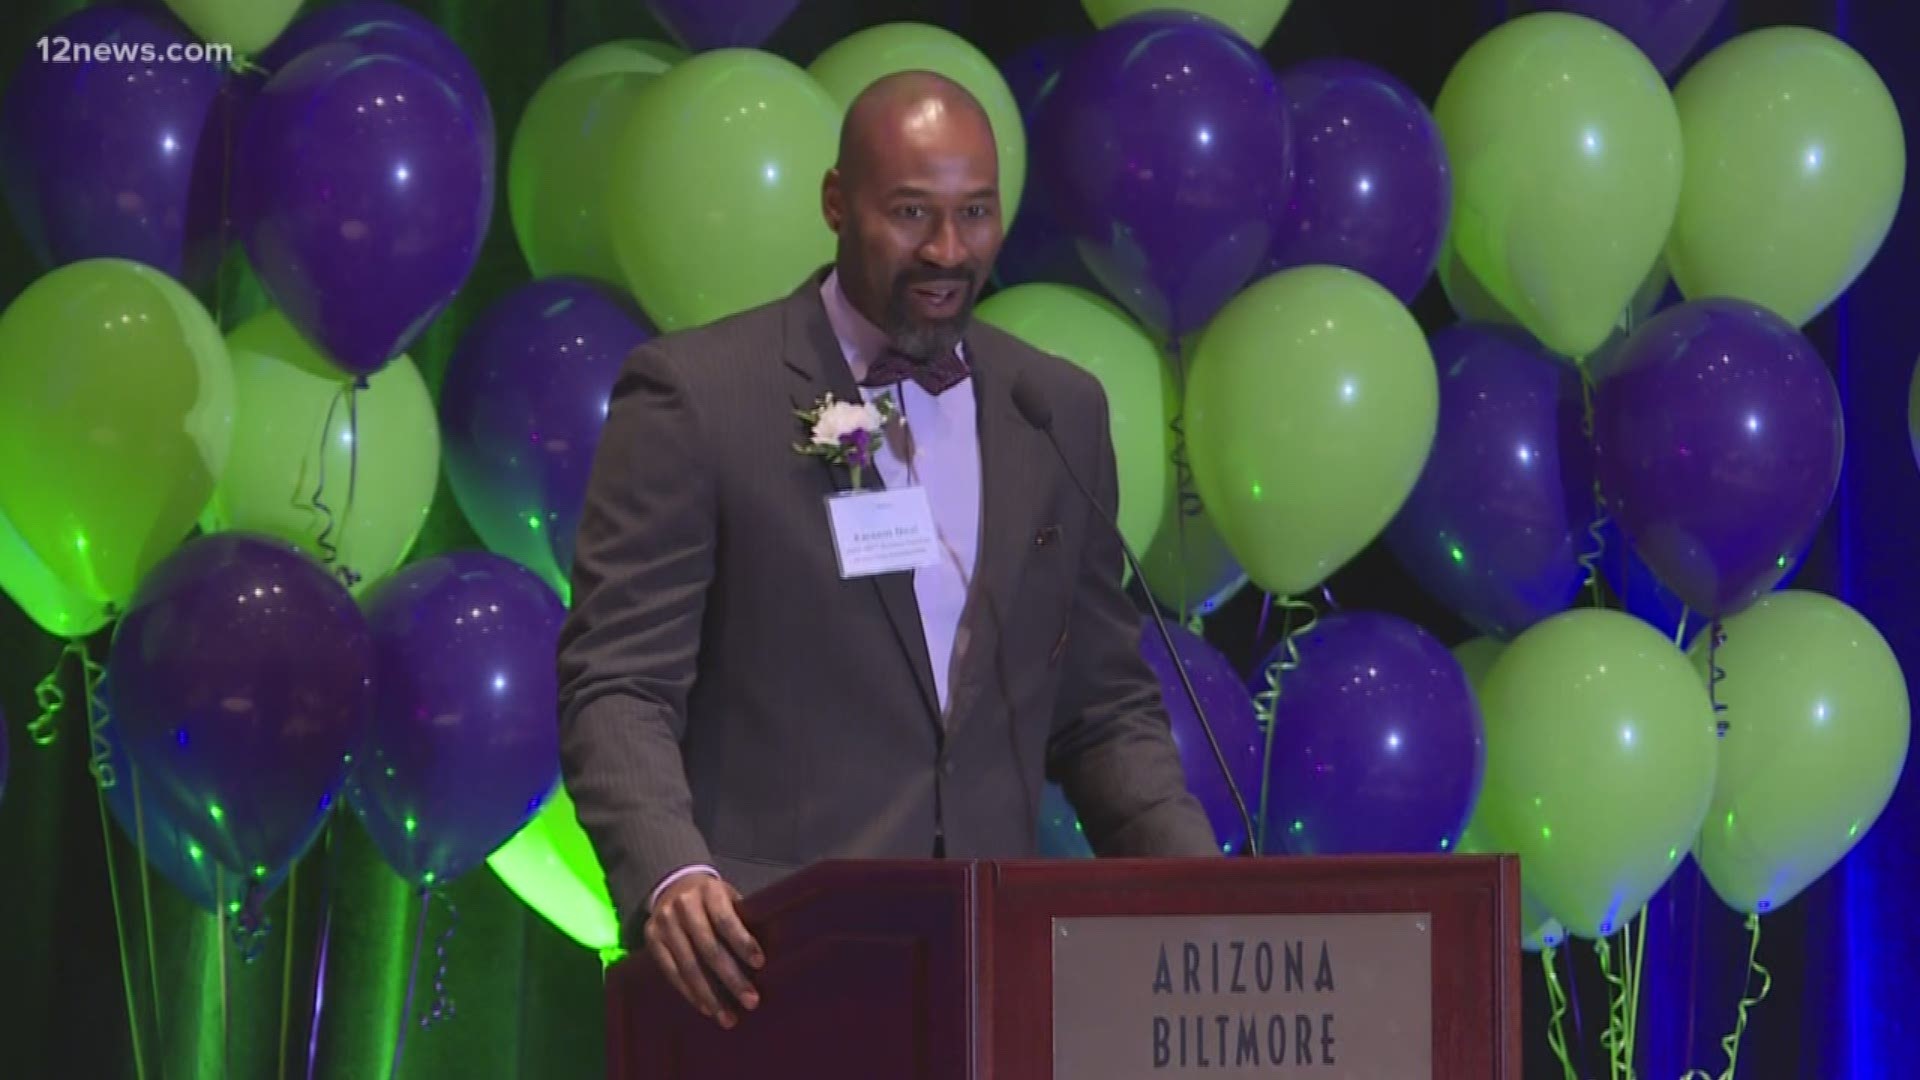 The Arizona Educational Foundation honored Kareem Neal, a special education teacher at Maryvale High School who advocates for teacher retention.